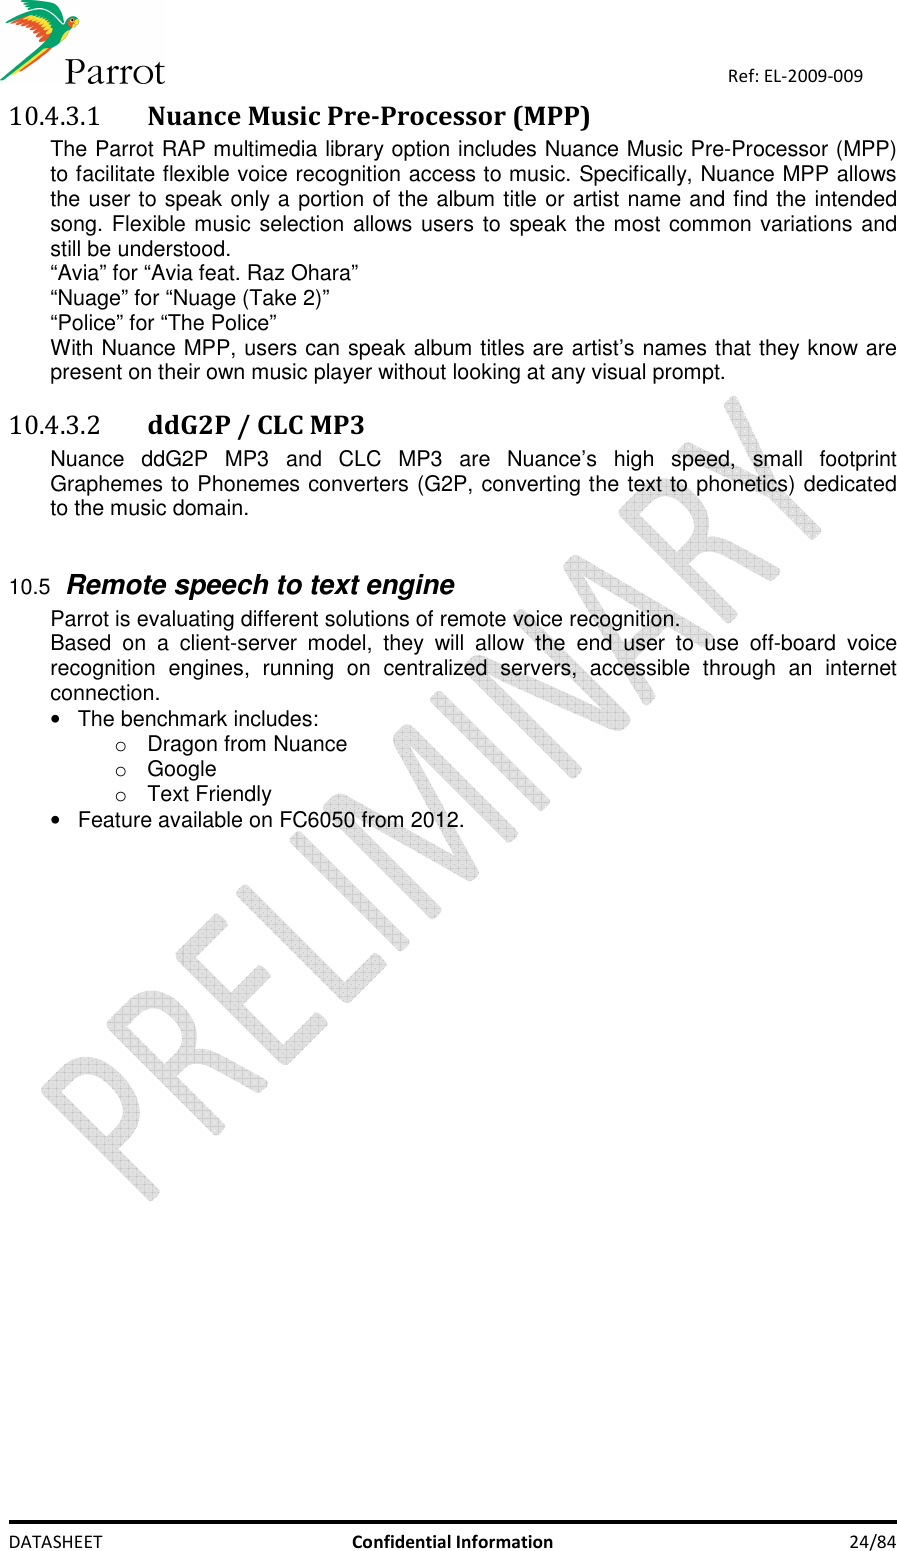    DATASHEET  Confidential Information  24/84 Ref: EL-2009-009 10.4.3.1 Nuance Music Pre-Processor (MPP) The Parrot RAP multimedia library option includes Nuance Music Pre-Processor (MPP) to facilitate flexible voice recognition access to music. Specifically, Nuance MPP allows the user to speak only a portion of the album title or artist name and find the intended song. Flexible music selection allows users to speak the most common variations and still be understood. “Avia” for “Avia feat. Raz Ohara” “Nuage” for “Nuage (Take 2)” “Police” for “The Police” With Nuance MPP, users can speak album titles are artist’s names that they know are present on their own music player without looking at any visual prompt. 10.4.3.2 ddG2P / CLC MP3 Nuance  ddG2P  MP3  and  CLC  MP3  are  Nuance’s  high  speed,  small  footprint Graphemes to Phonemes converters (G2P, converting the text to phonetics) dedicated to the music domain.   10.5 Remote speech to text engine Parrot is evaluating different solutions of remote voice recognition.  Based  on  a  client-server  model,  they  will  allow  the  end  user  to  use  off-board  voice recognition  engines,  running  on  centralized  servers,  accessible  through  an  internet connection. •  The benchmark includes: o  Dragon from Nuance o  Google o  Text Friendly •  Feature available on FC6050 from 2012.   